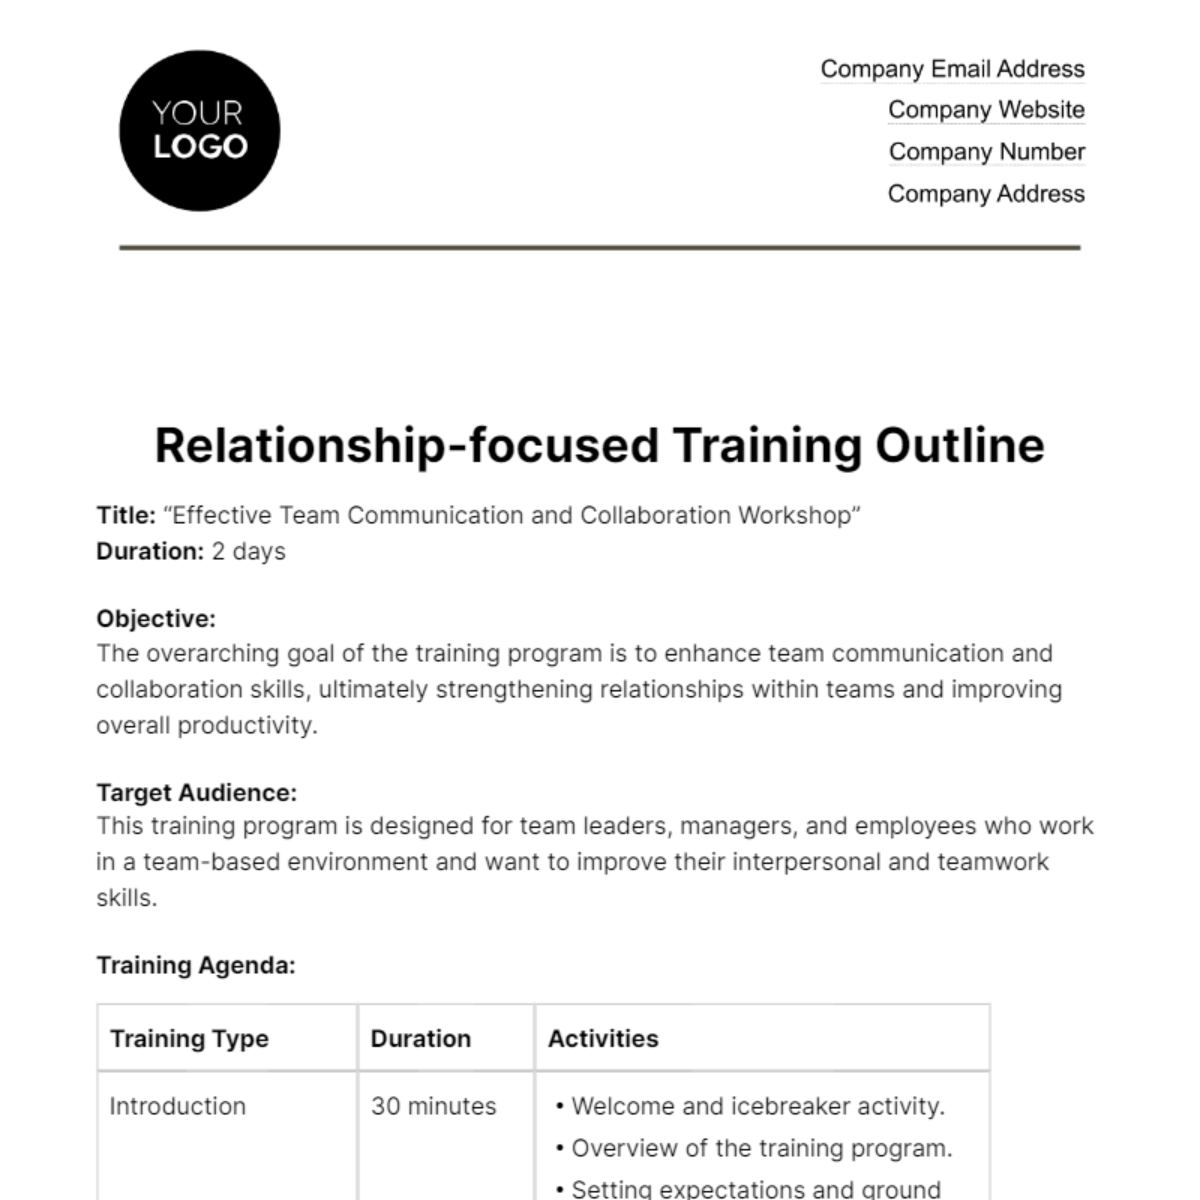 Free Relationship-focused Training Outline HR Template